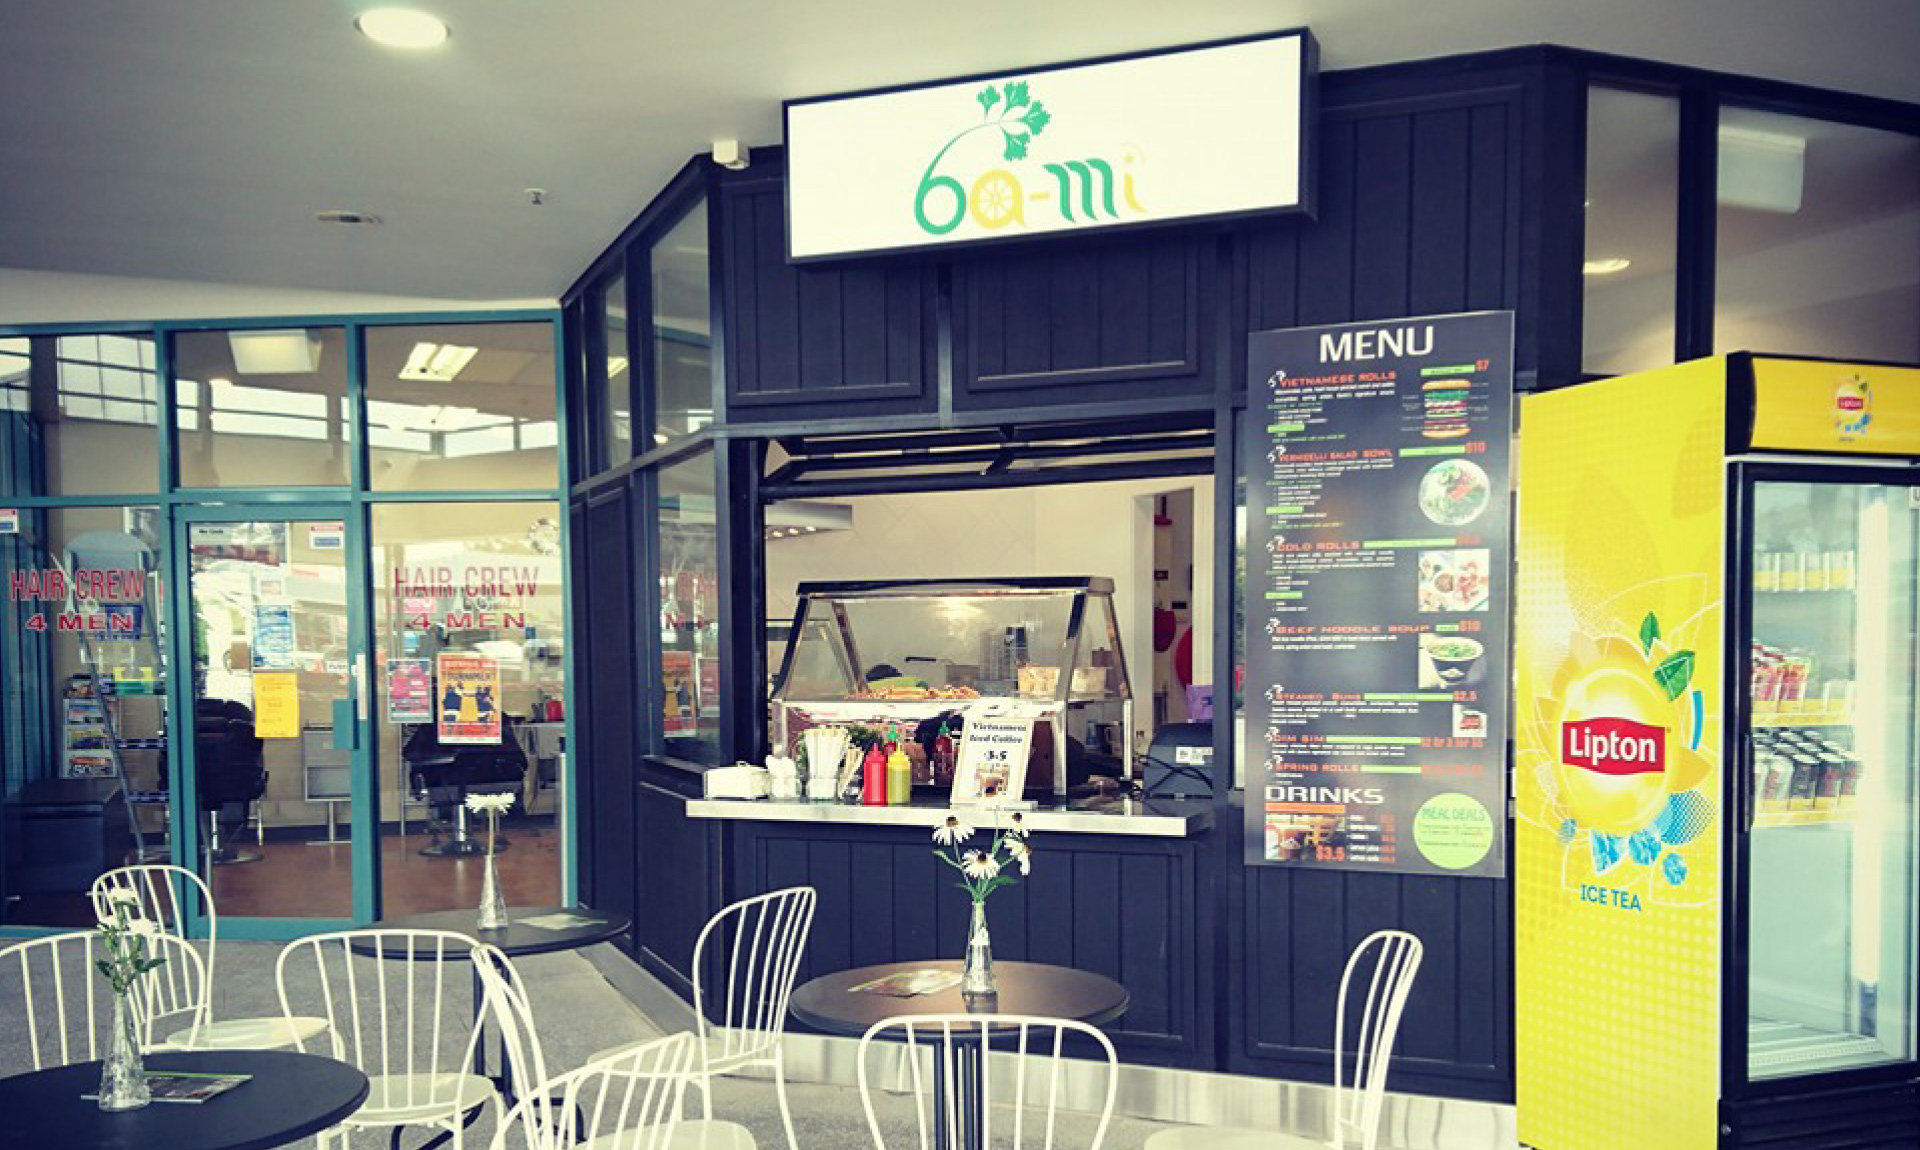 Bami opens its first store in Southgate Plaza